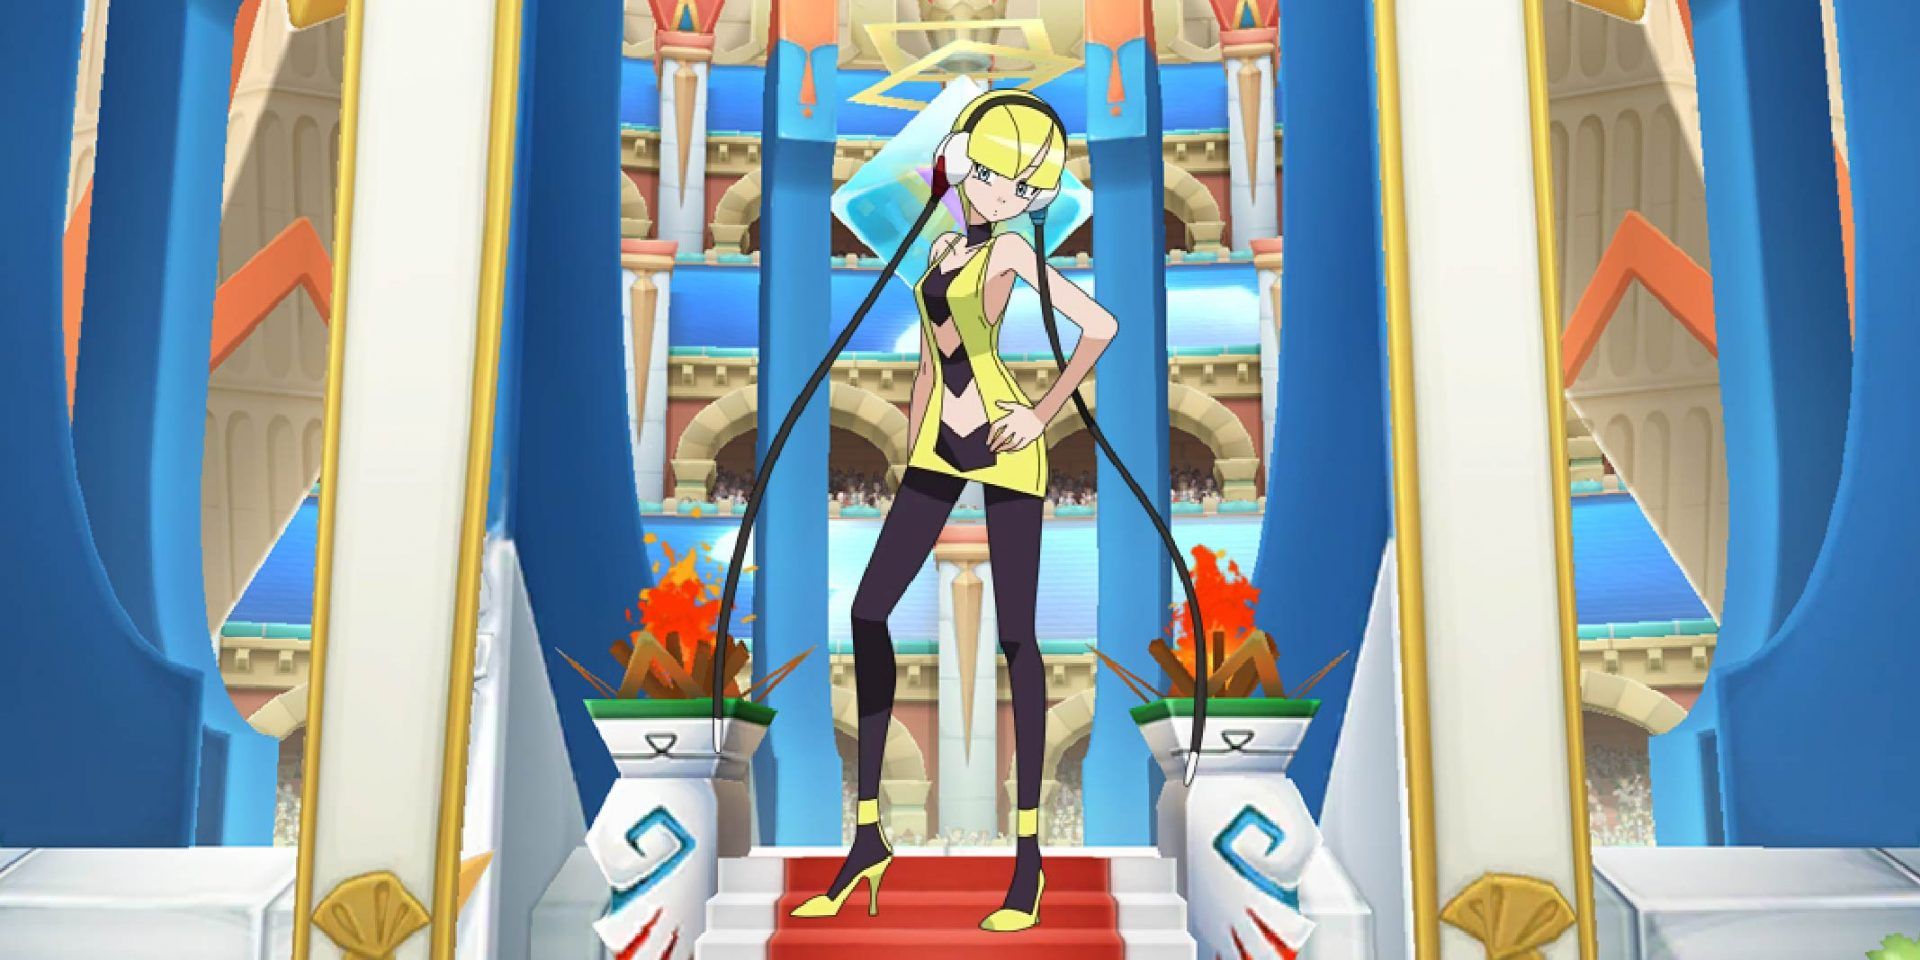 Elesa from Pokémon standing against an arena backdrop.